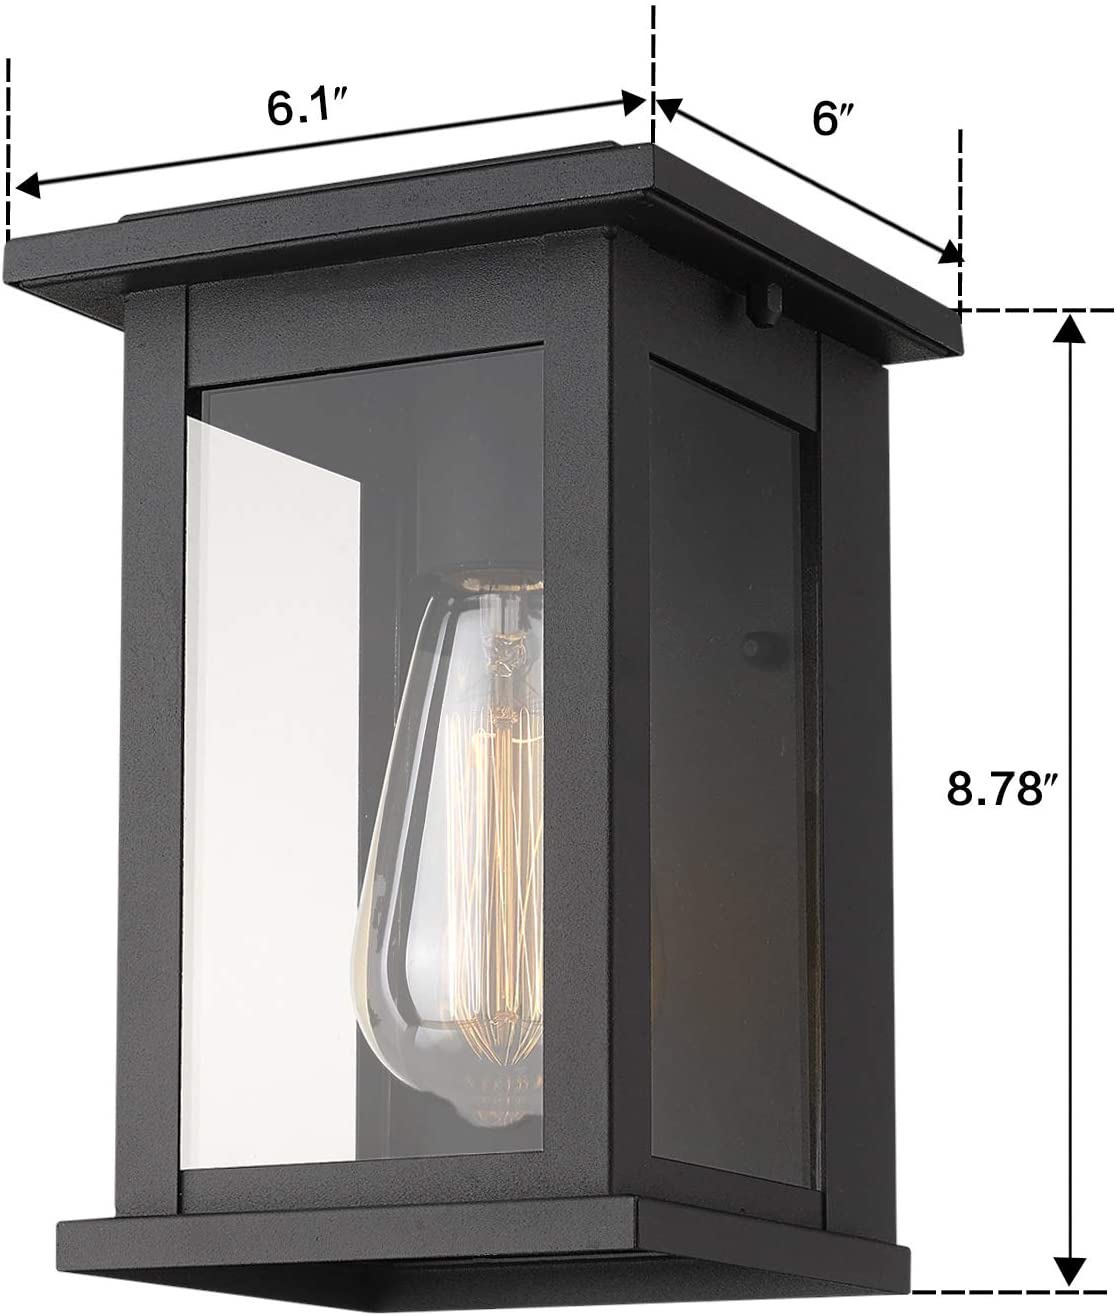 Square outdoor wall sconce light fixture black glass wall lamp